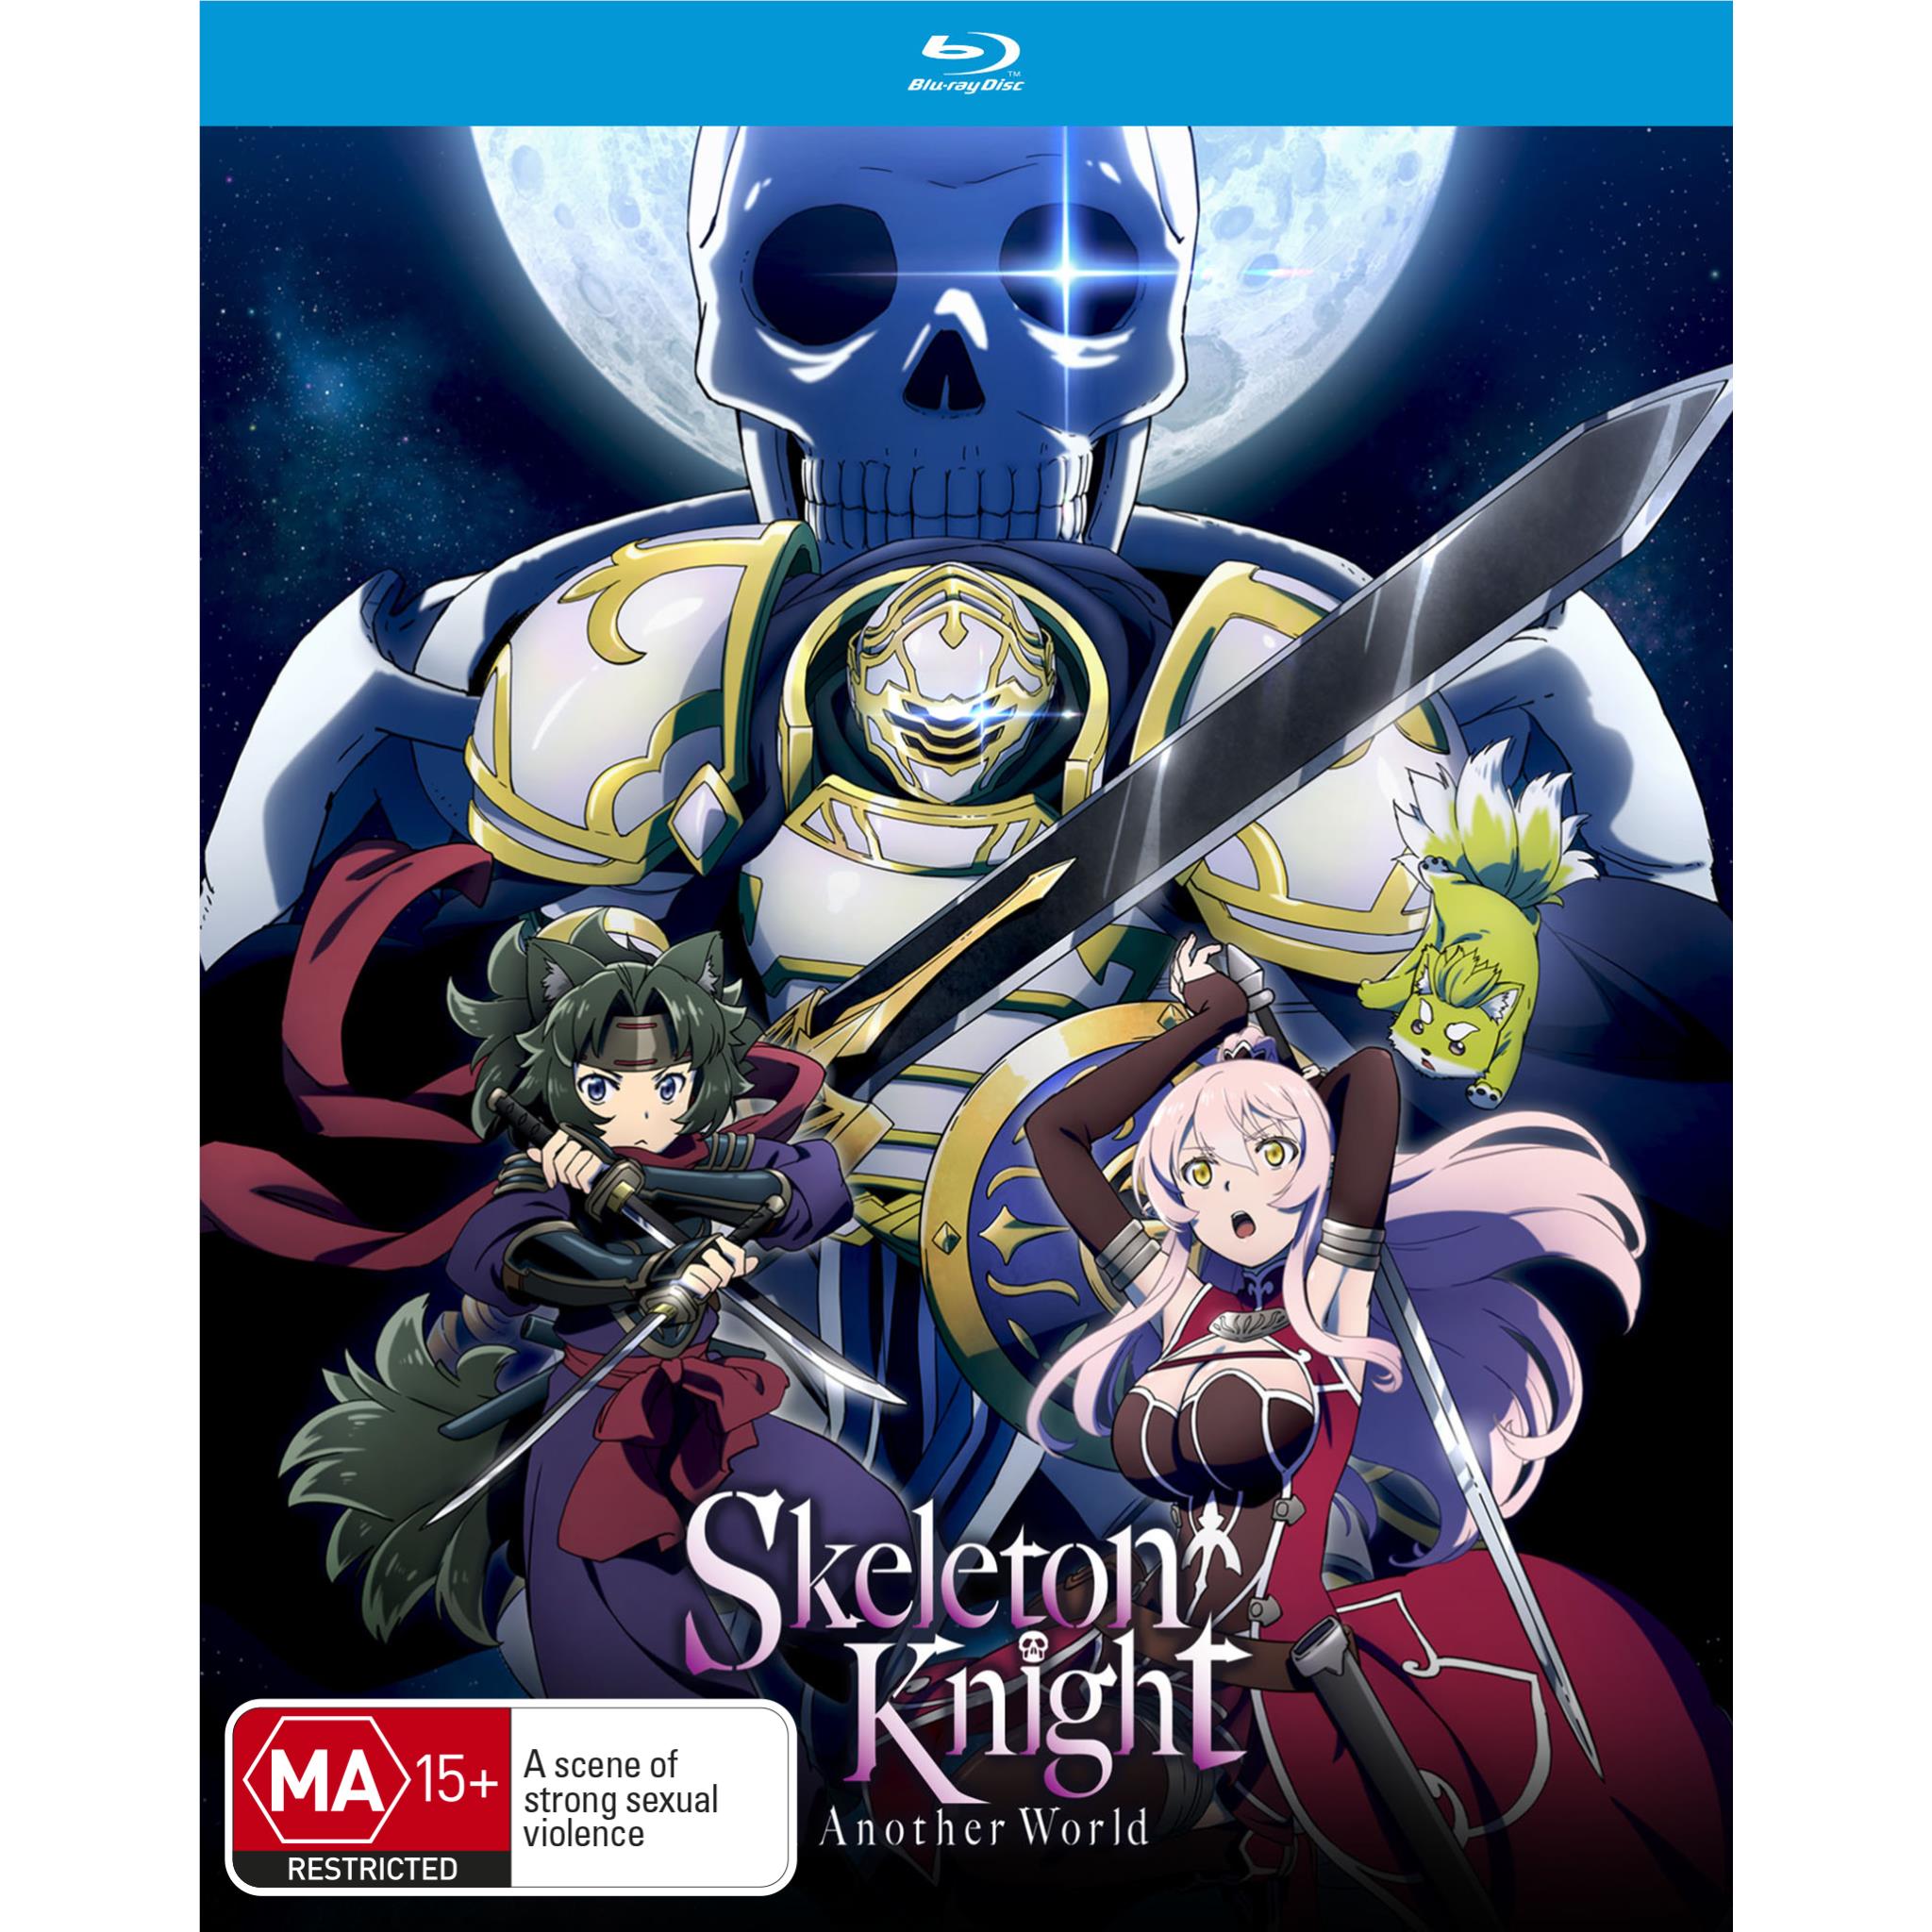 Knight's And Magic: The Complete Series (Blu-ray + DVD) 